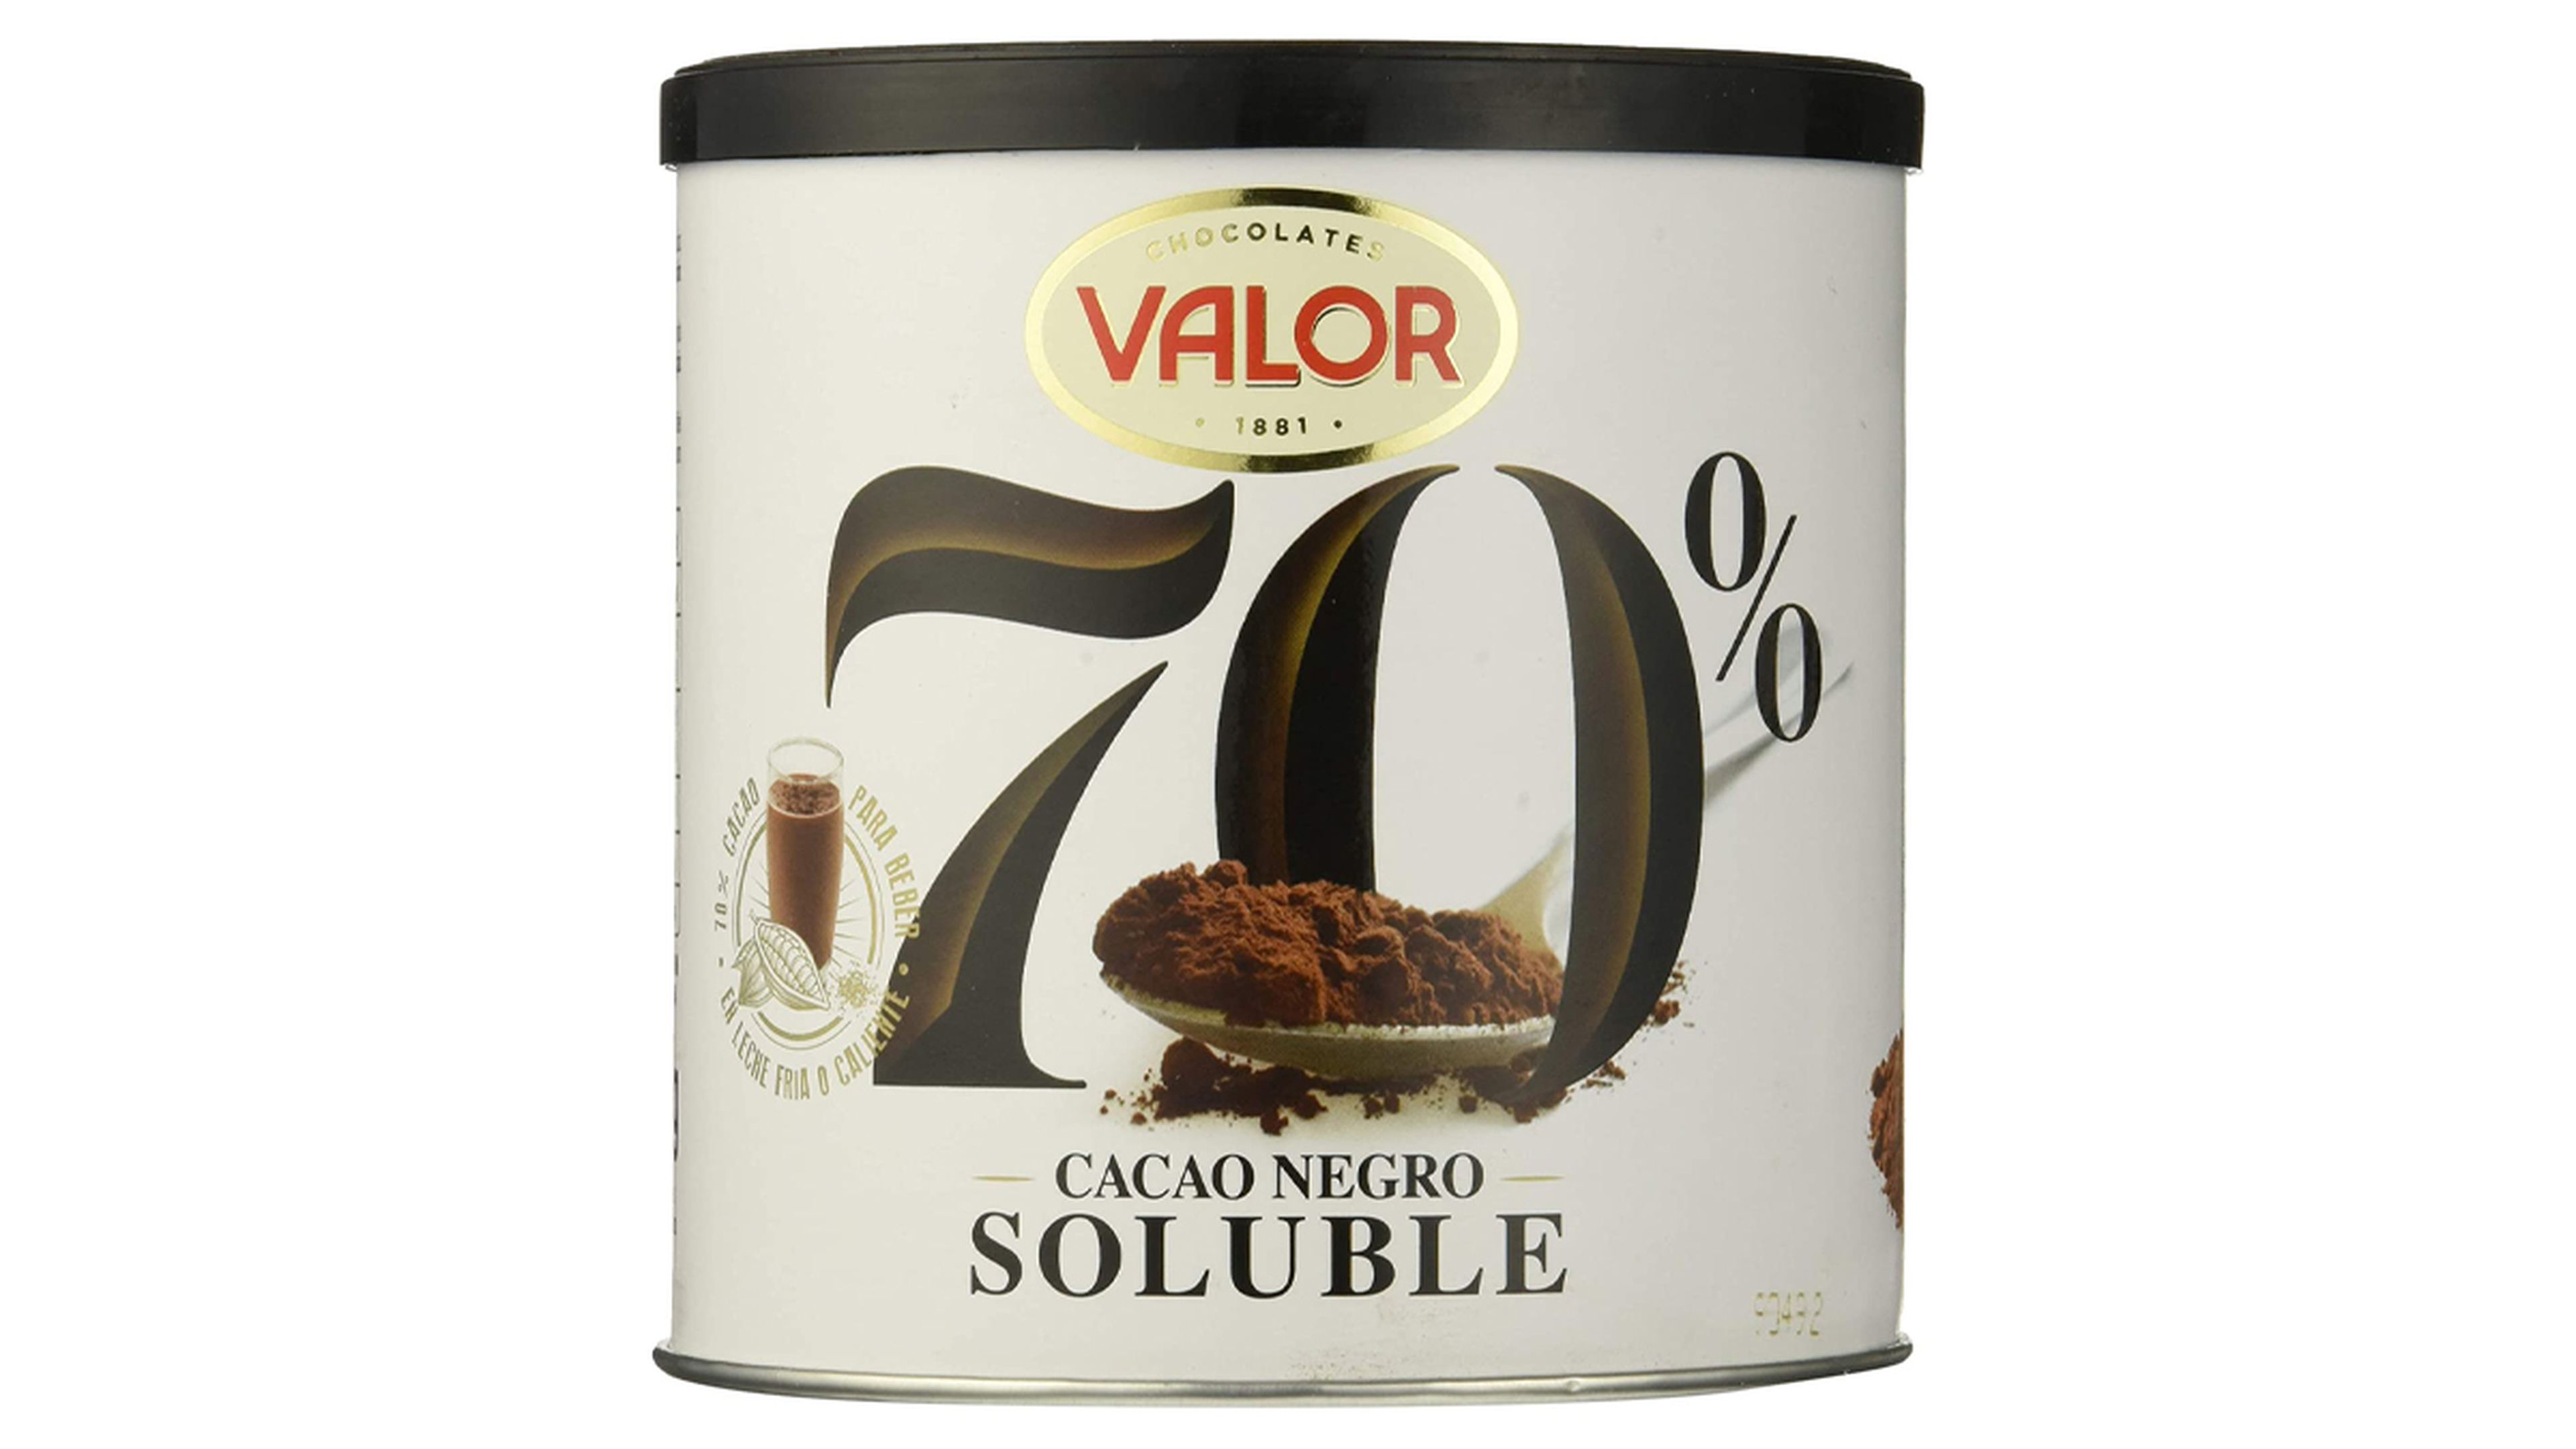 Valor Cacao Soluble Negro 70%